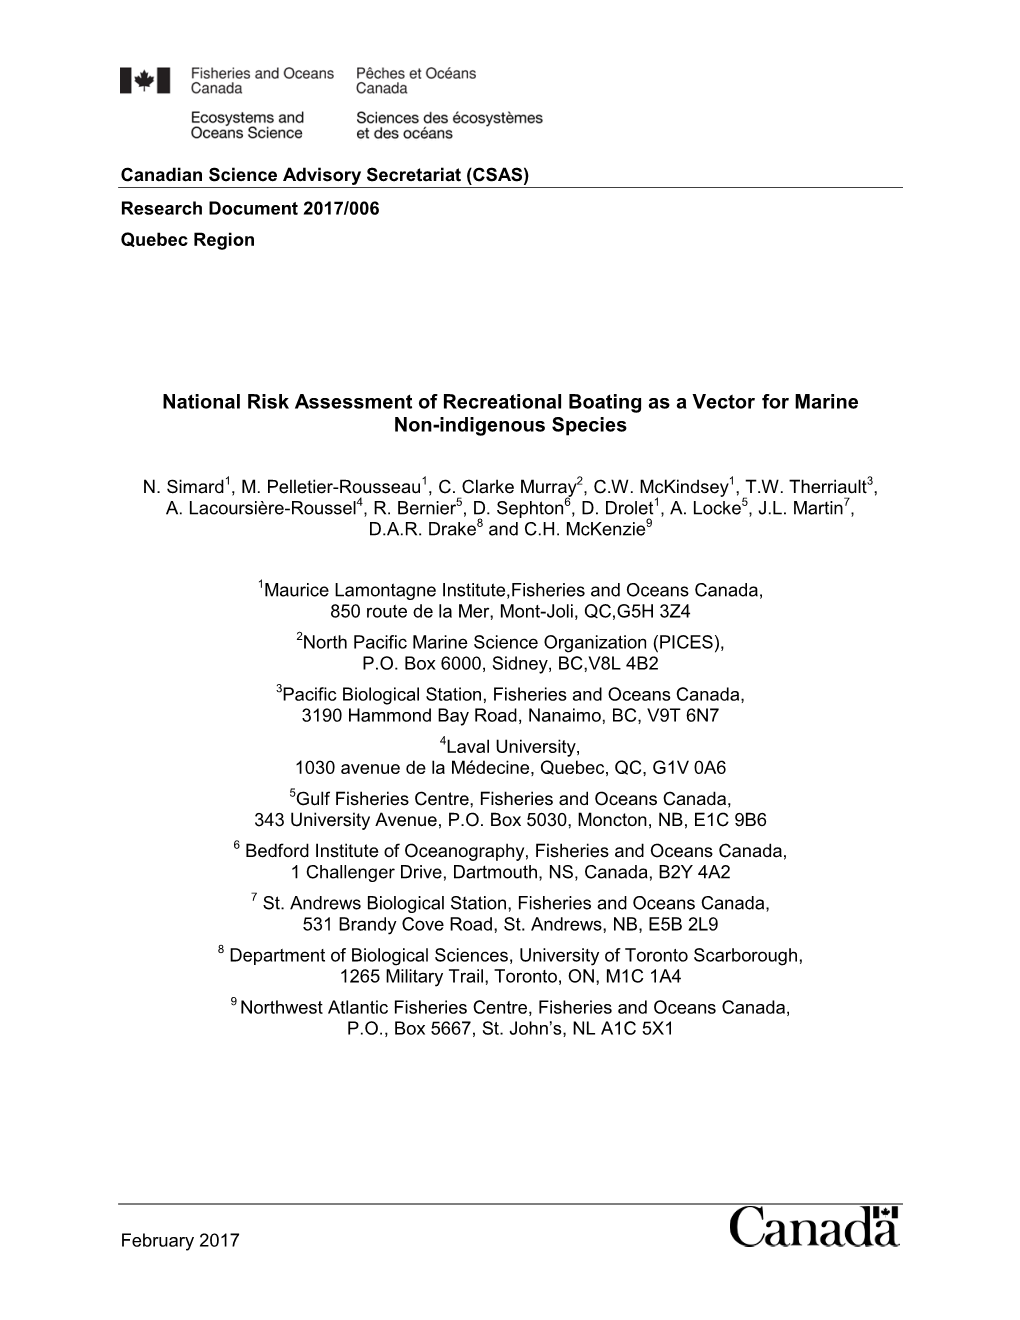 National Risk Assessment of Recreational Boating As a Vector for Marine Non-Indigenous Species